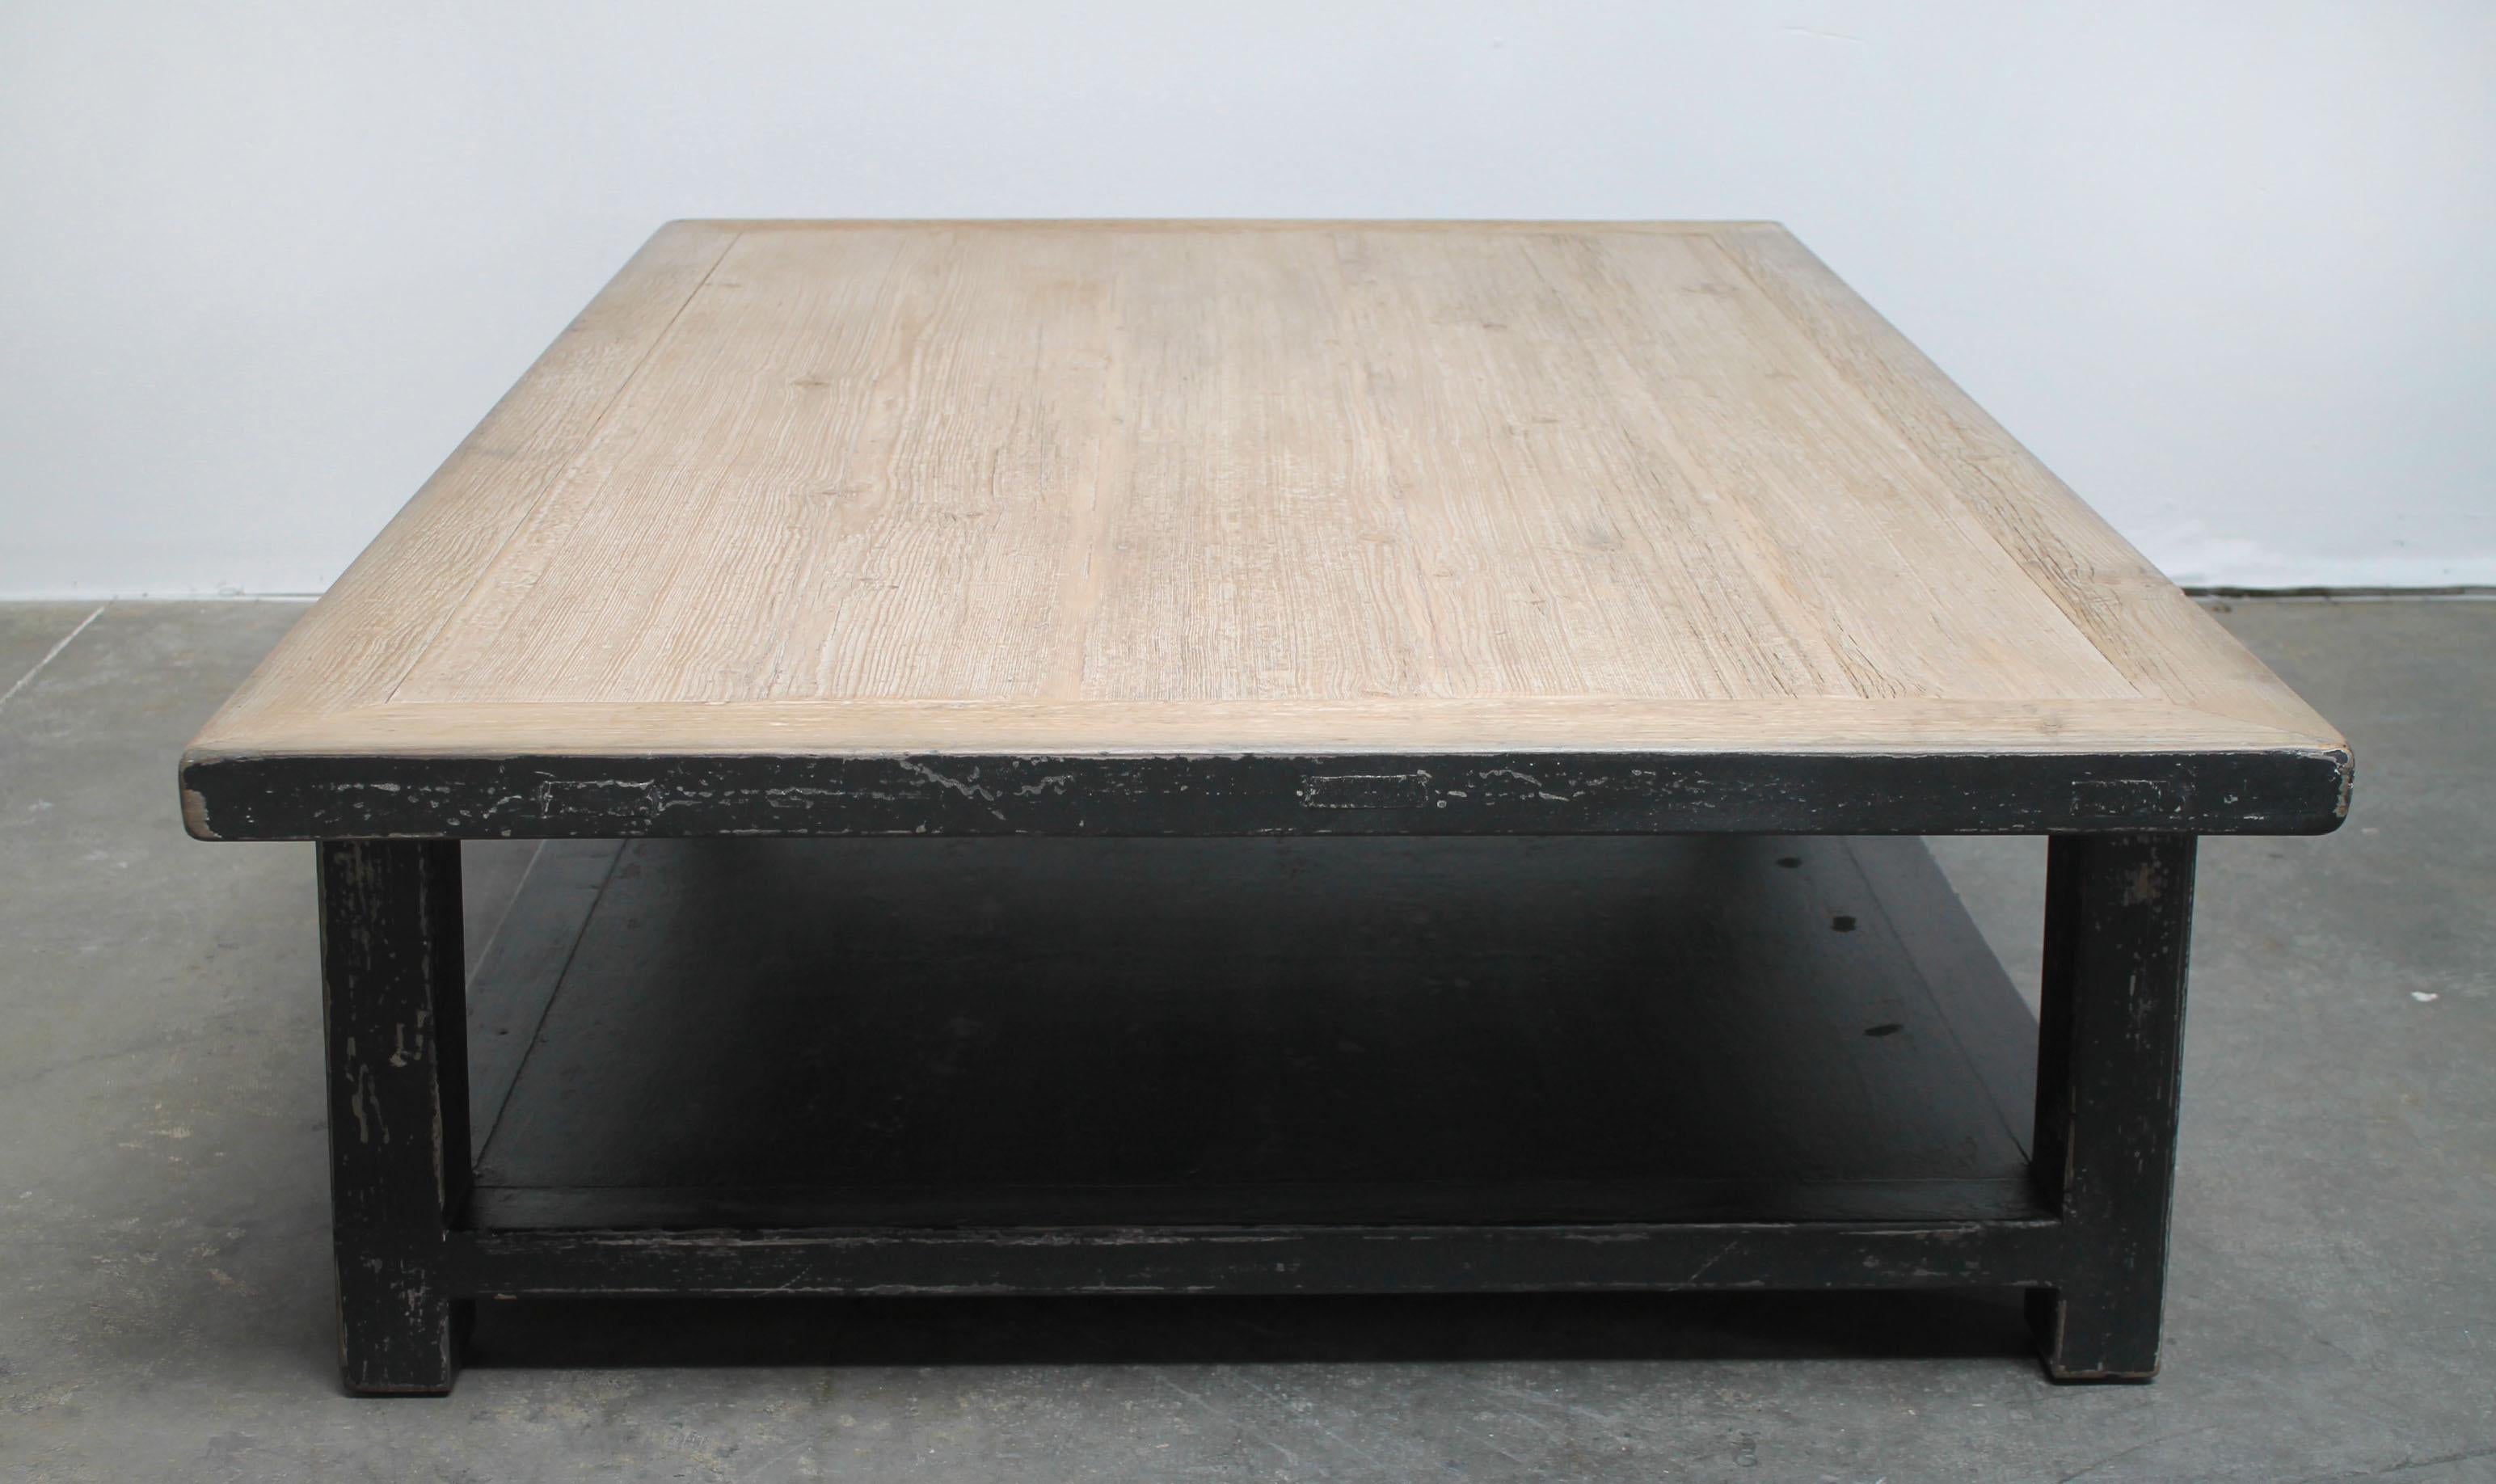 Large Reclaimed Pine Wood Coffee Table with Distressed Black Finish 3